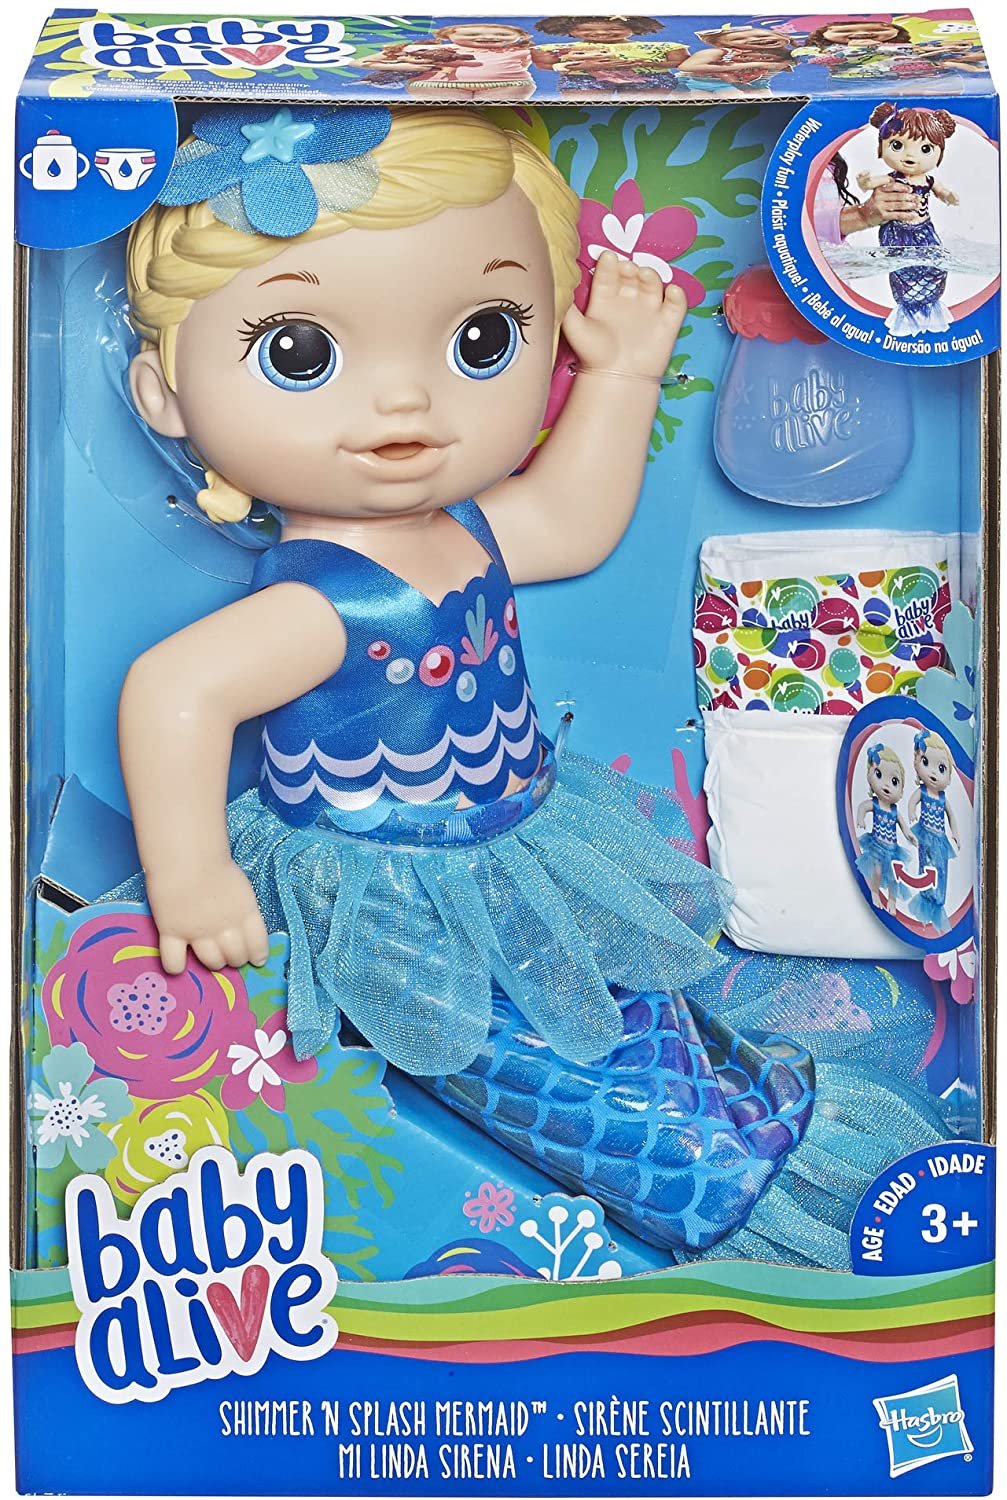 Baby Alive: Shimmer 'n Splash Mermaid 14-Inch Doll Brown Hair, Green Eyes Kids Toy for Boys and Girls - image 3 of 8